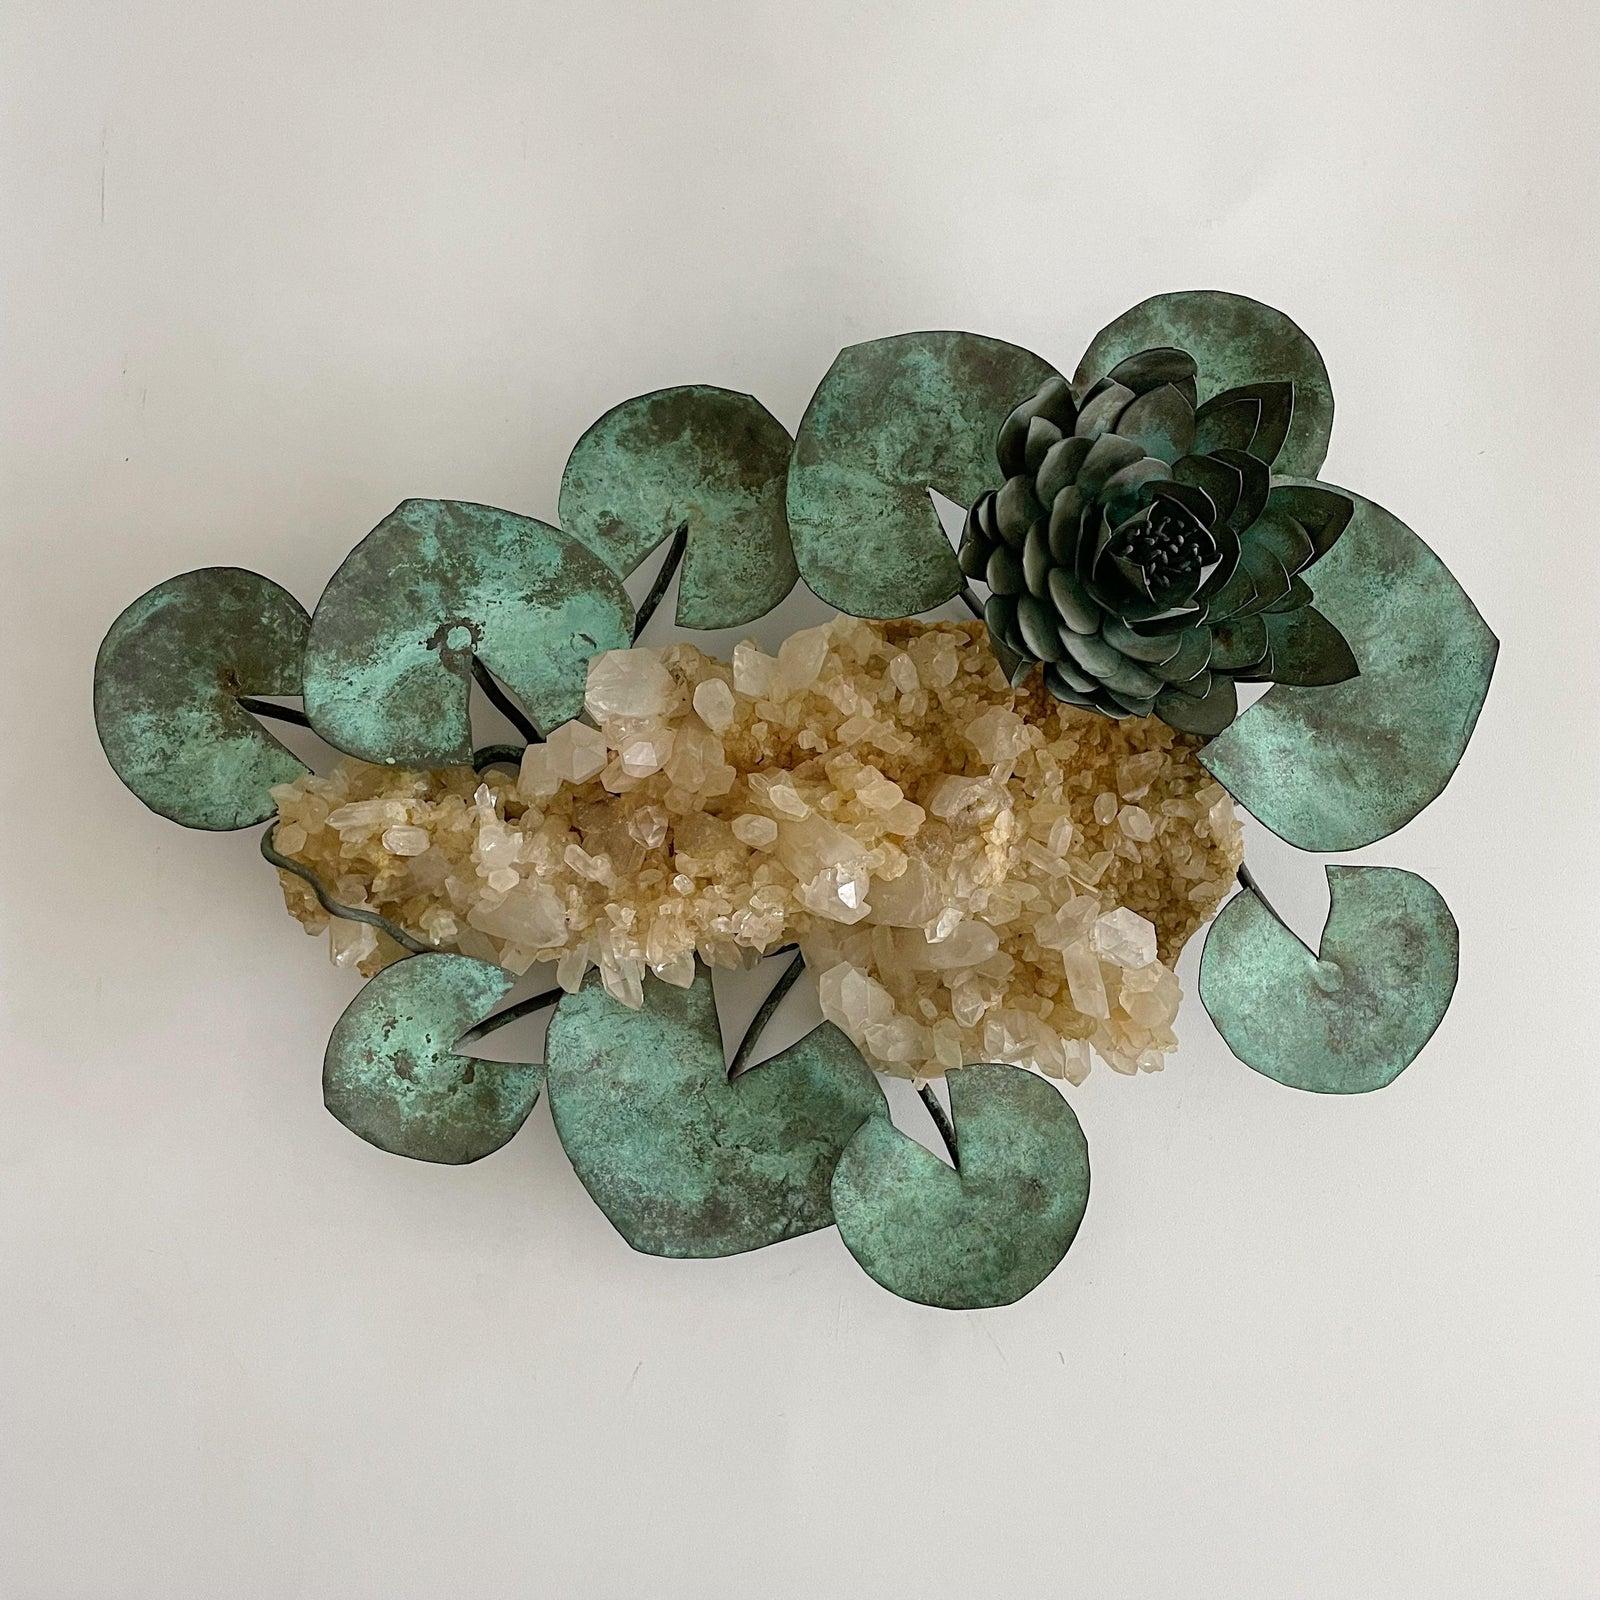 Exceptional tabletop sculpture with rock crystal in the center surrounded by a large copper lily and leaves, the copper showing years of deep patina. Unsigned.